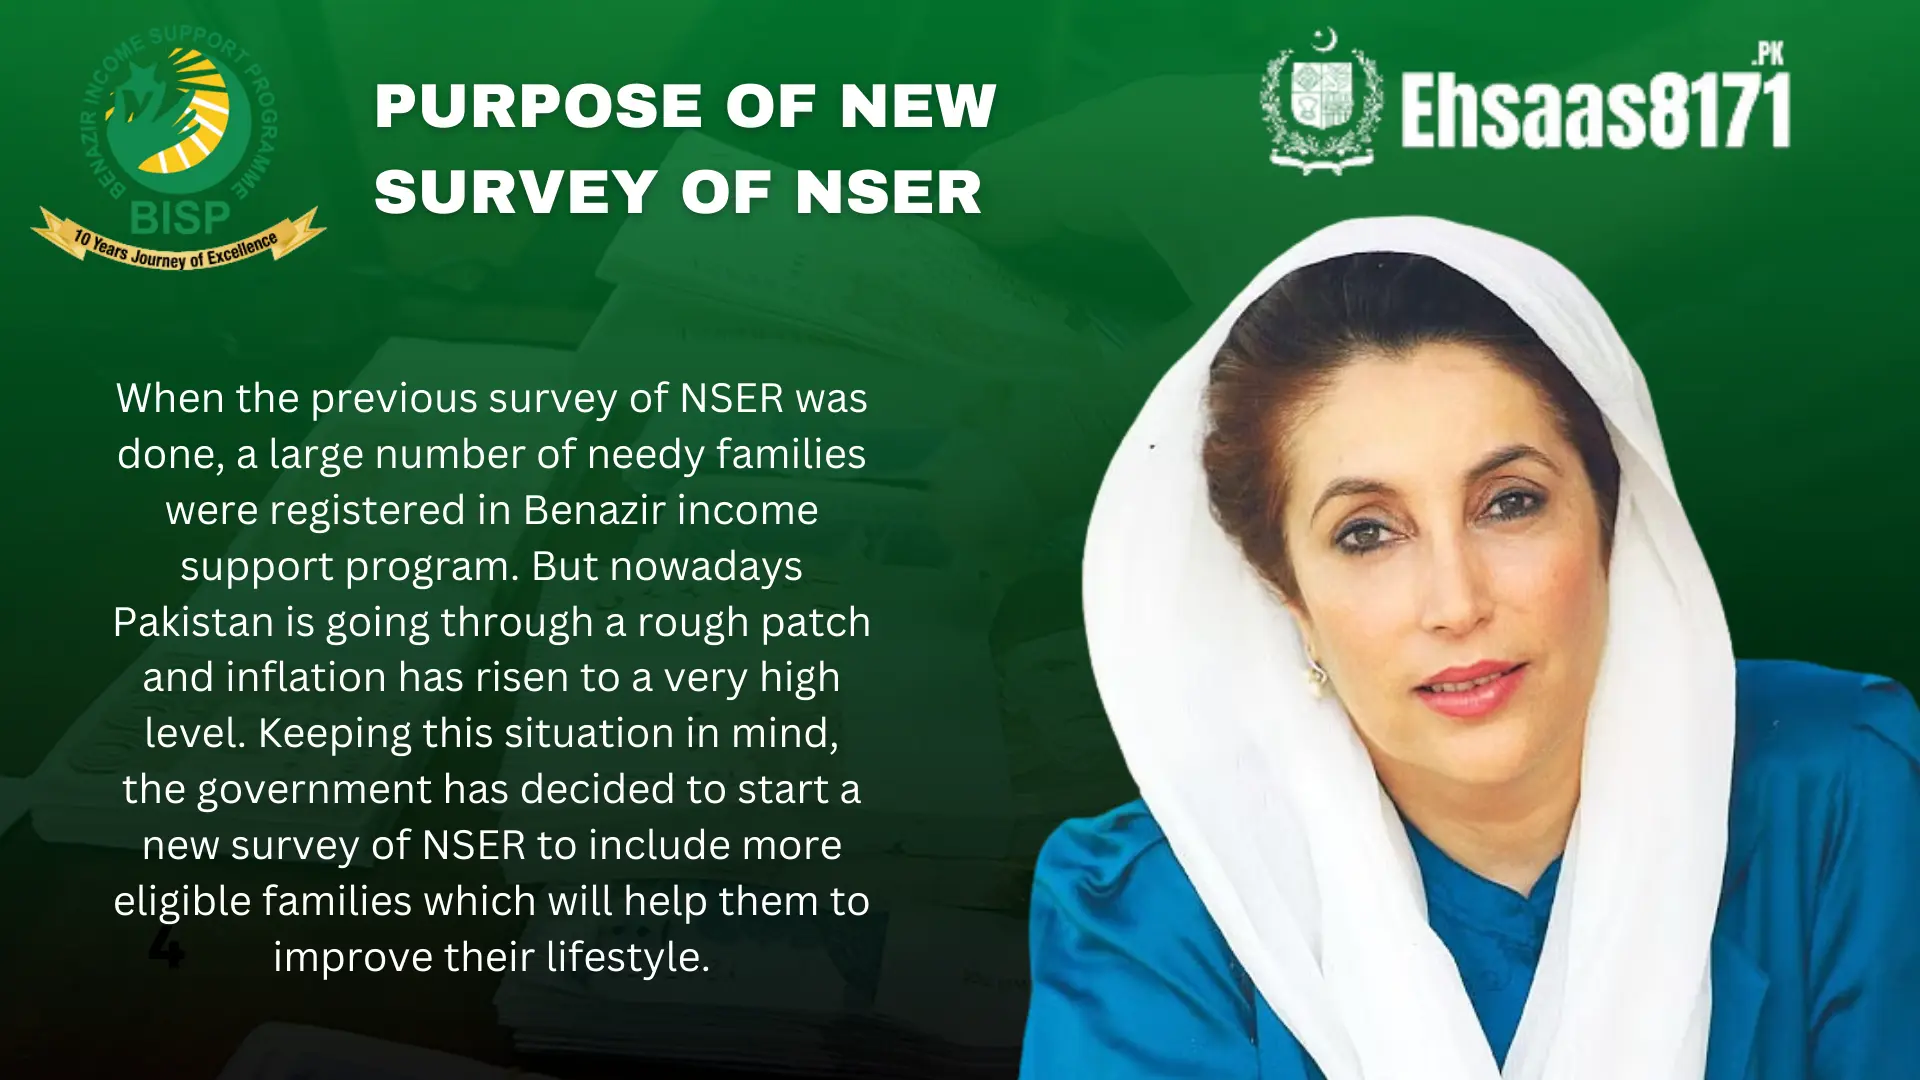 Purpose of New Survey of NSER